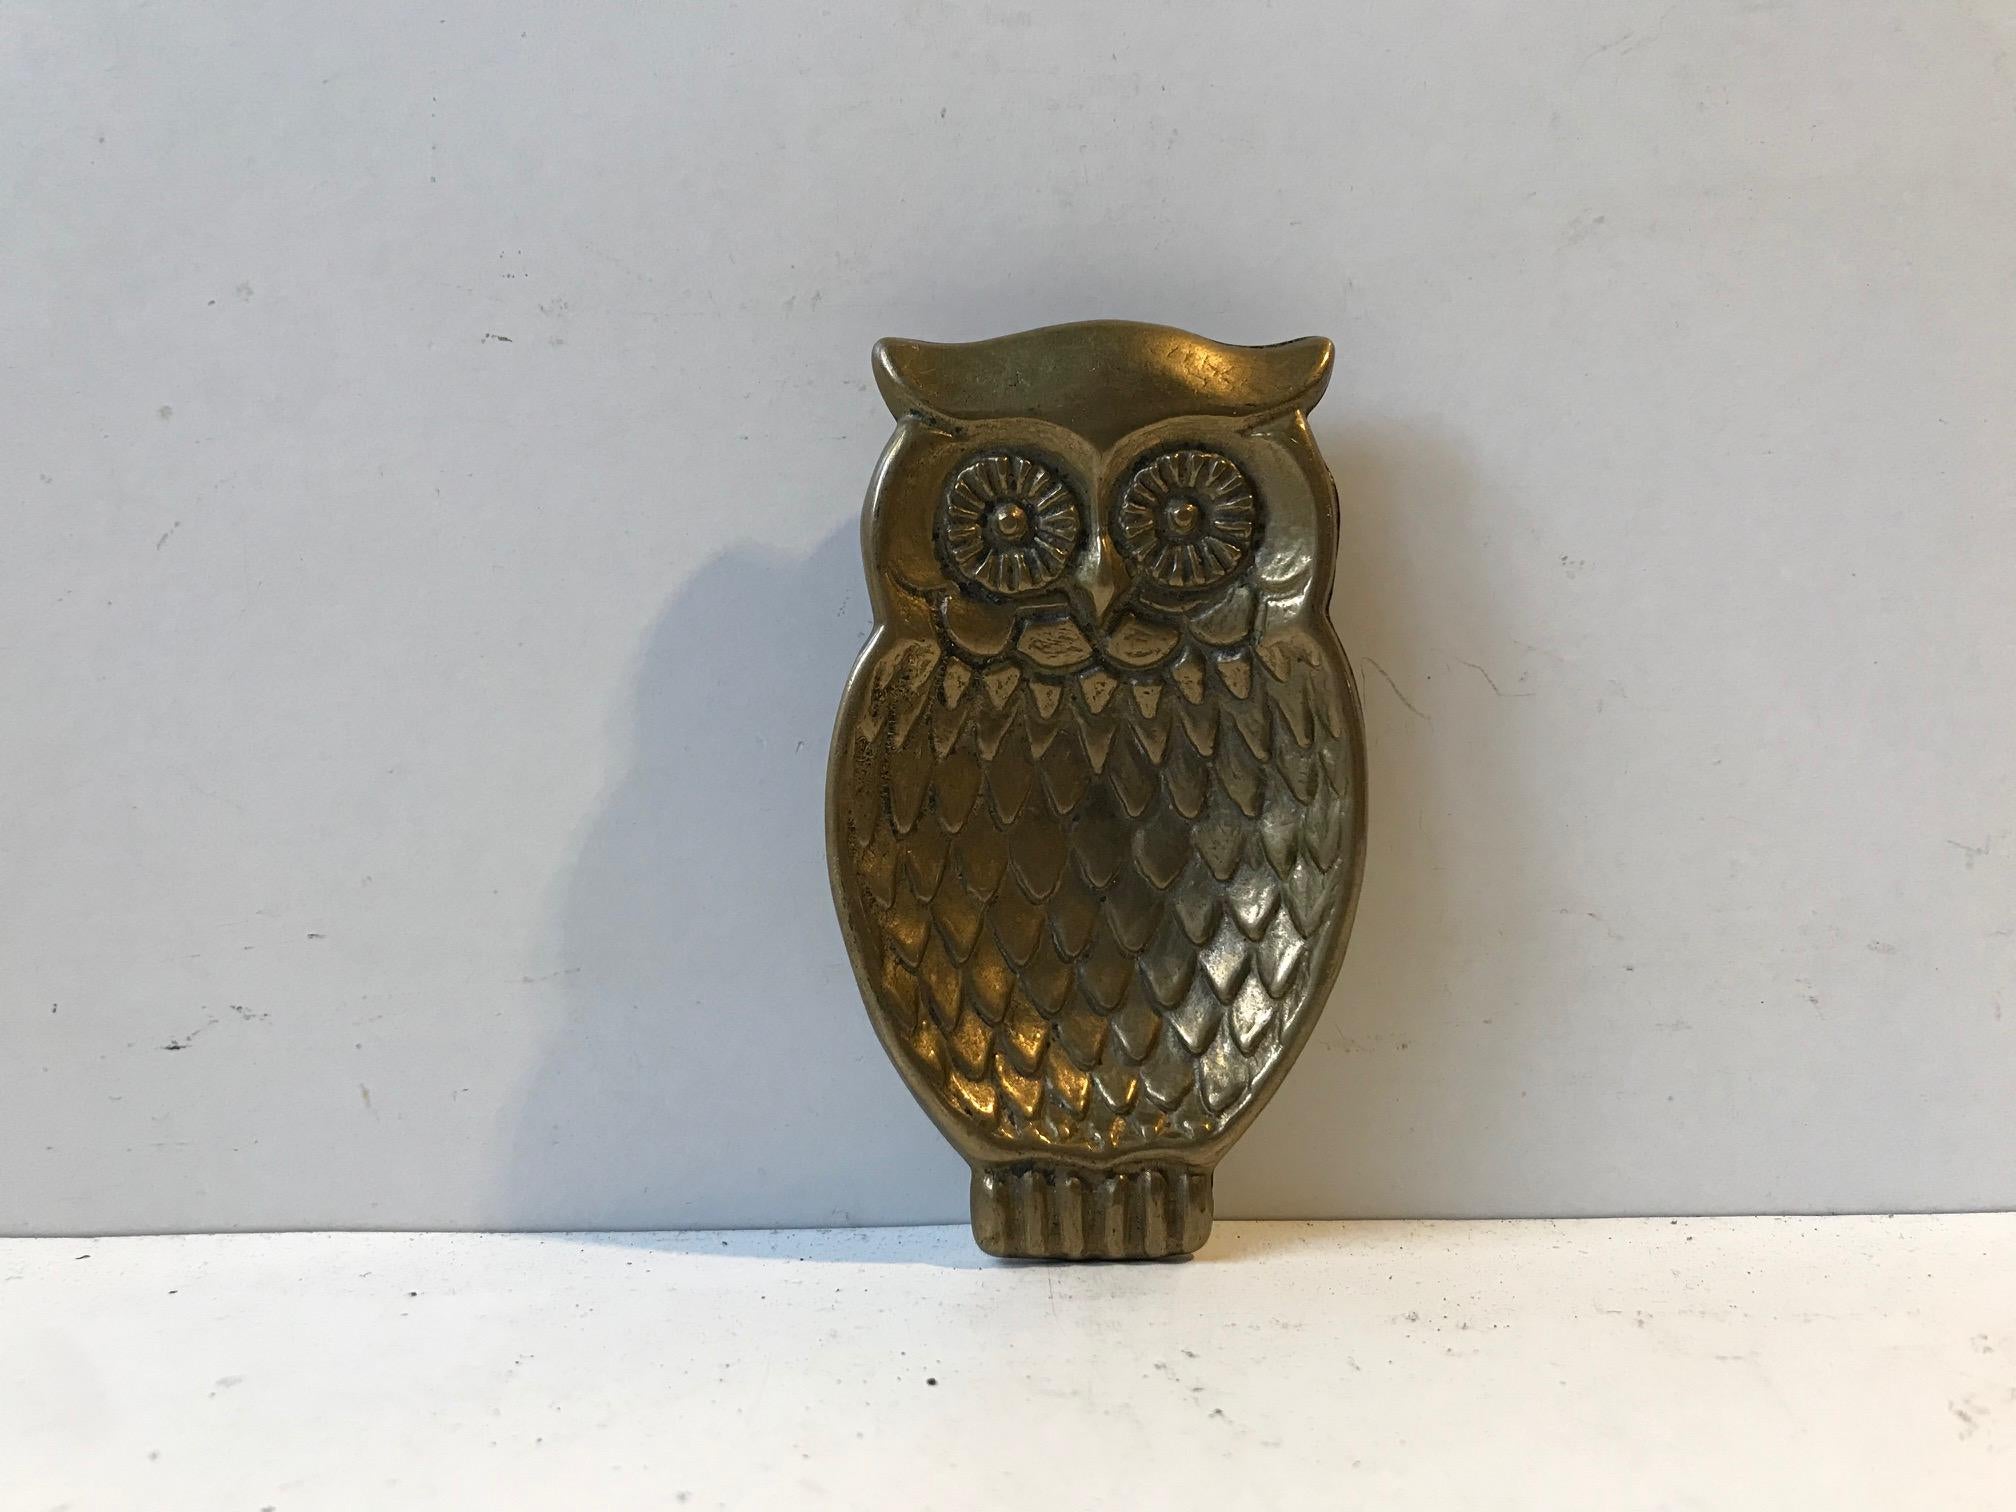 Unusual small owl wall plaque or ashtray in brass. Fine detailing and finished to its backside. Made in England, circa 1900-1920.